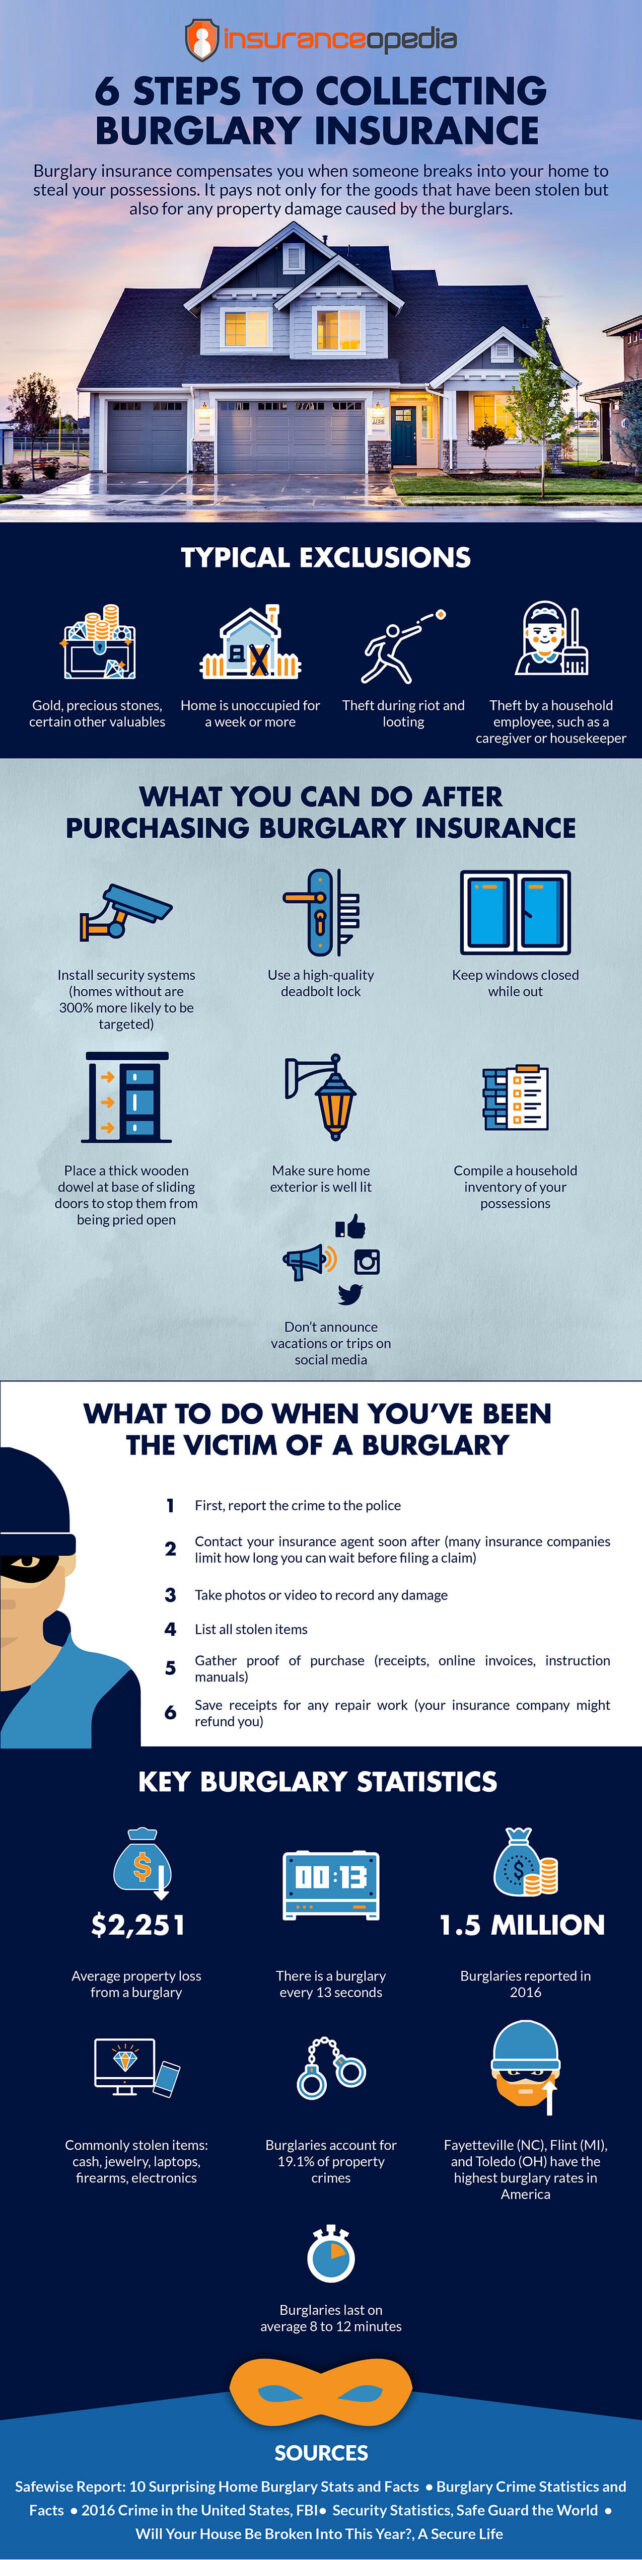 6 Steps to Collecting Burglary Insurance